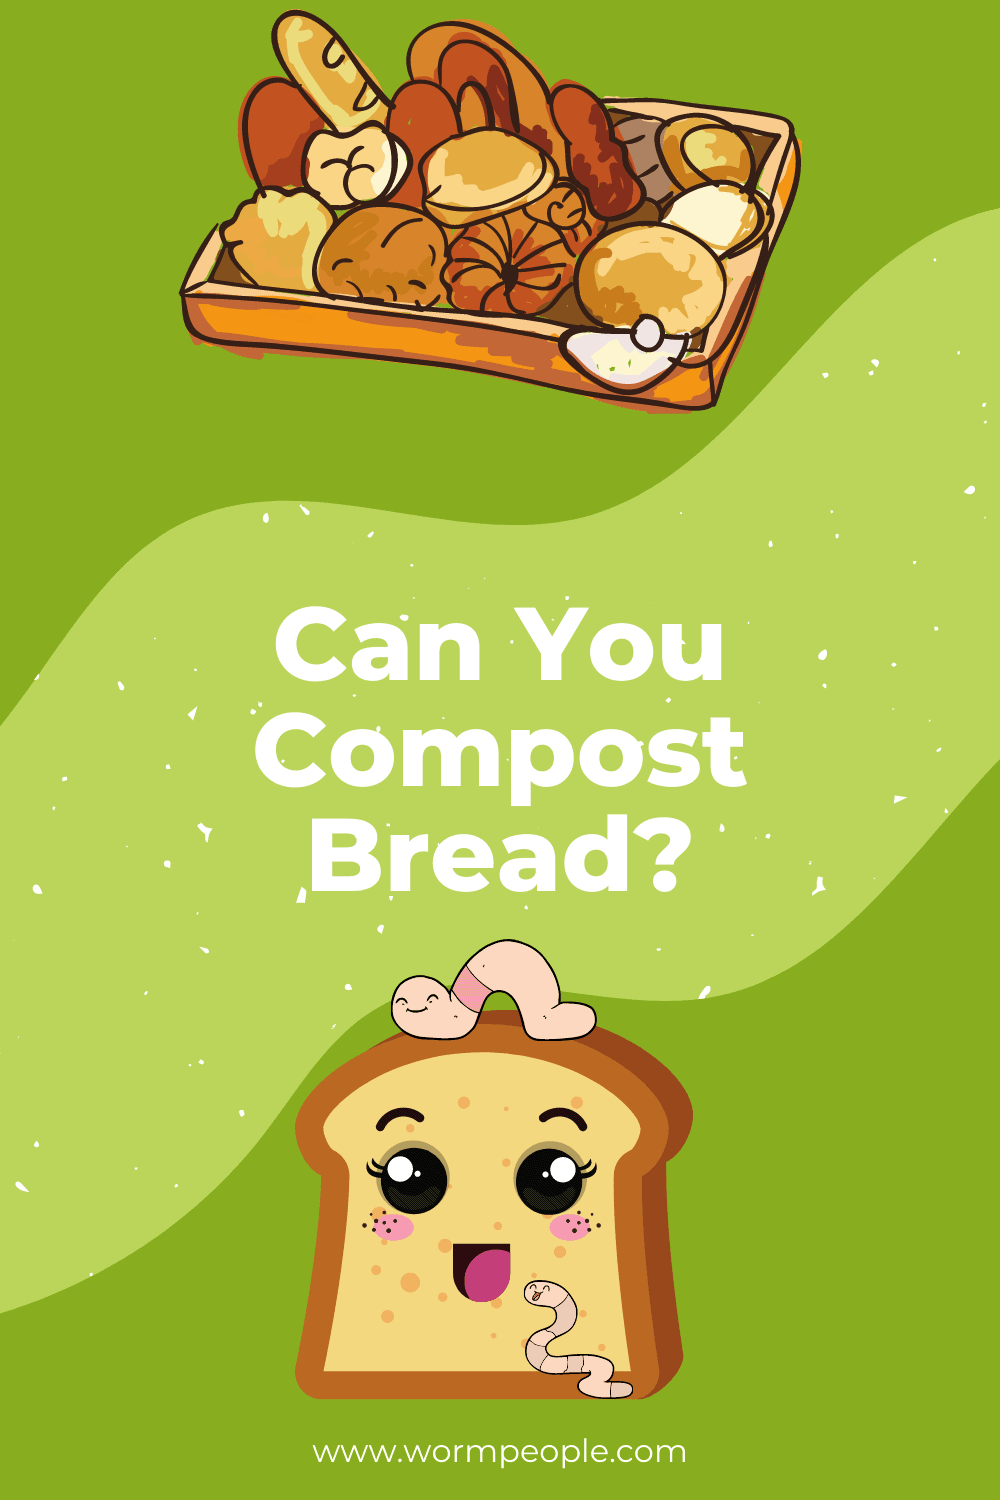 Can You Compost Bread?